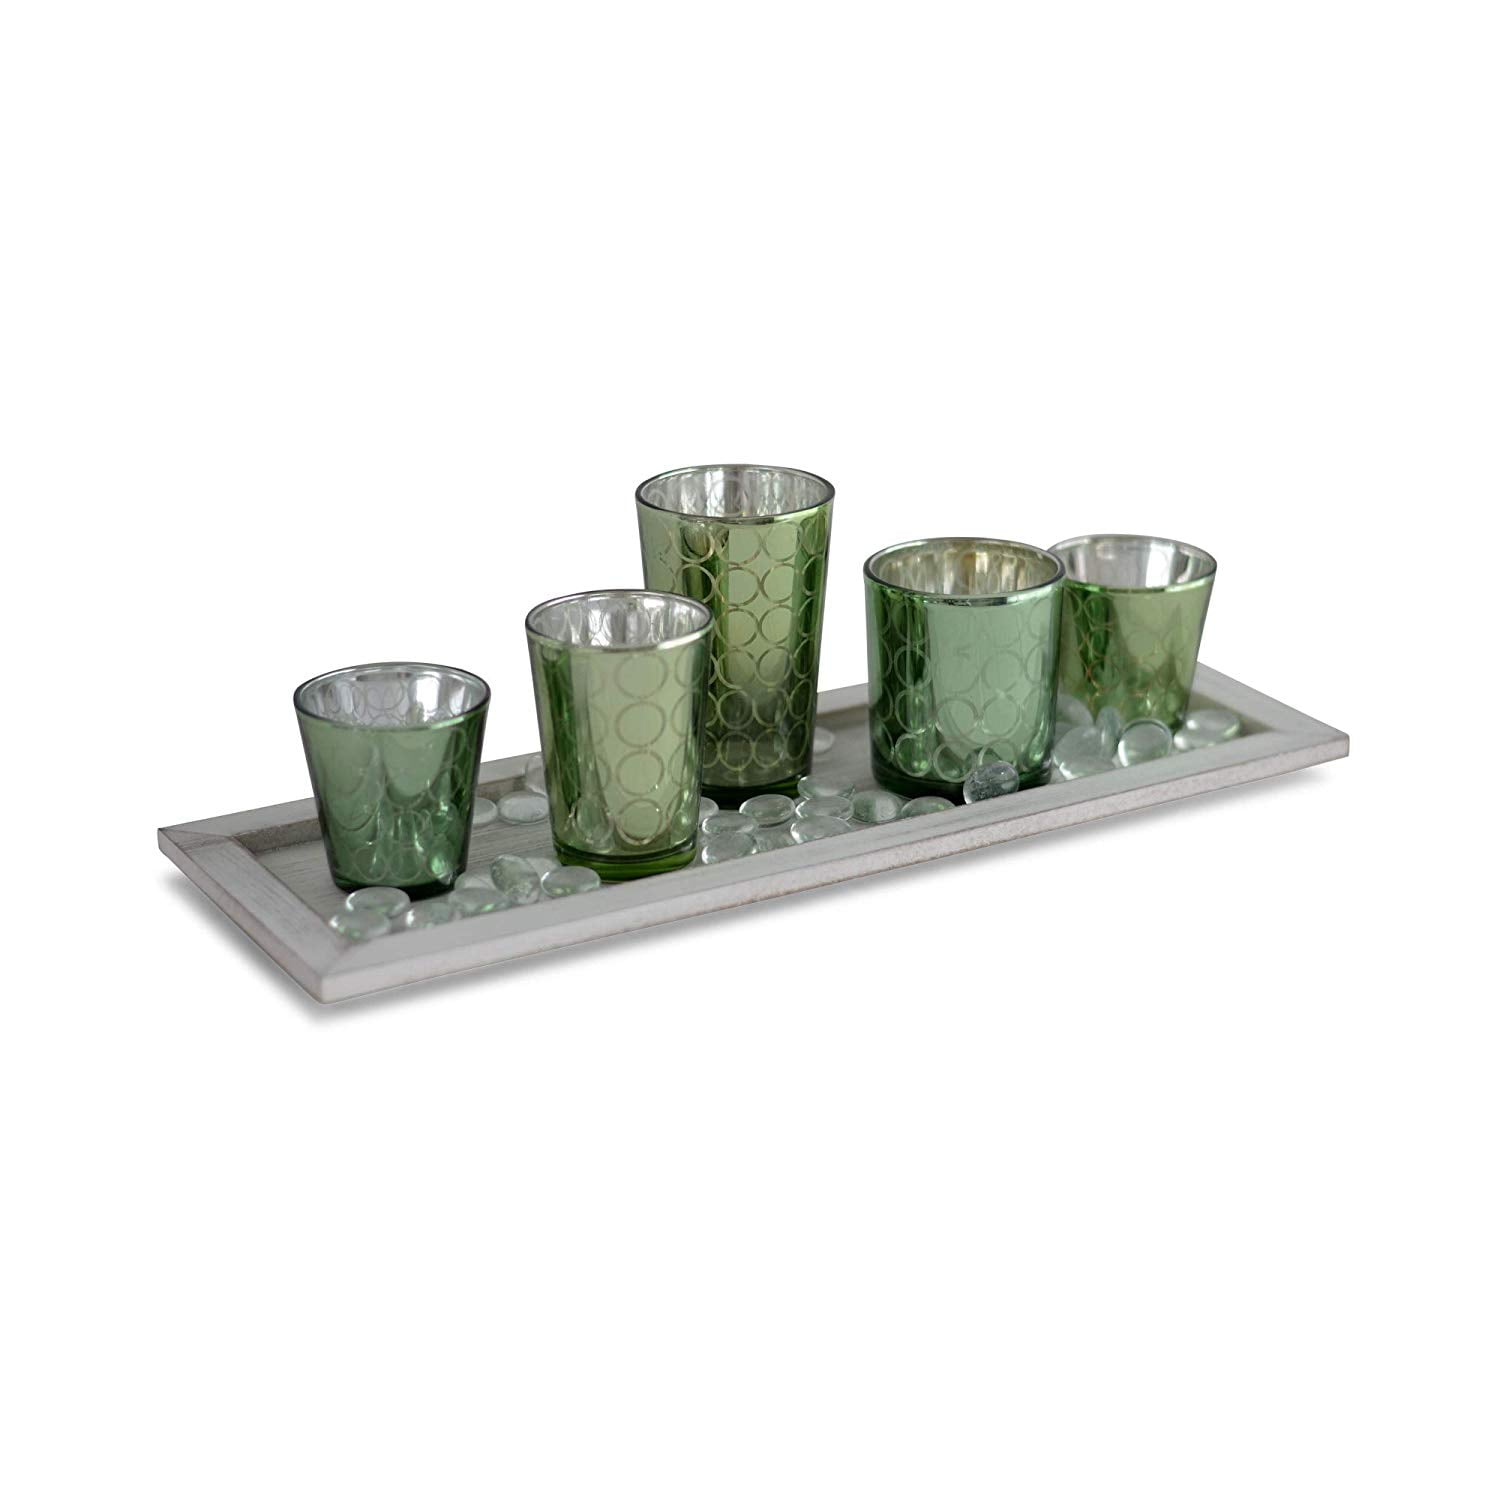 4-Leaves Candle Holder Set,Glass Cups Natural Stones and Wooden Tray Votive Tealight Holders for Wedding Party Holiday Spa and Home Decor 